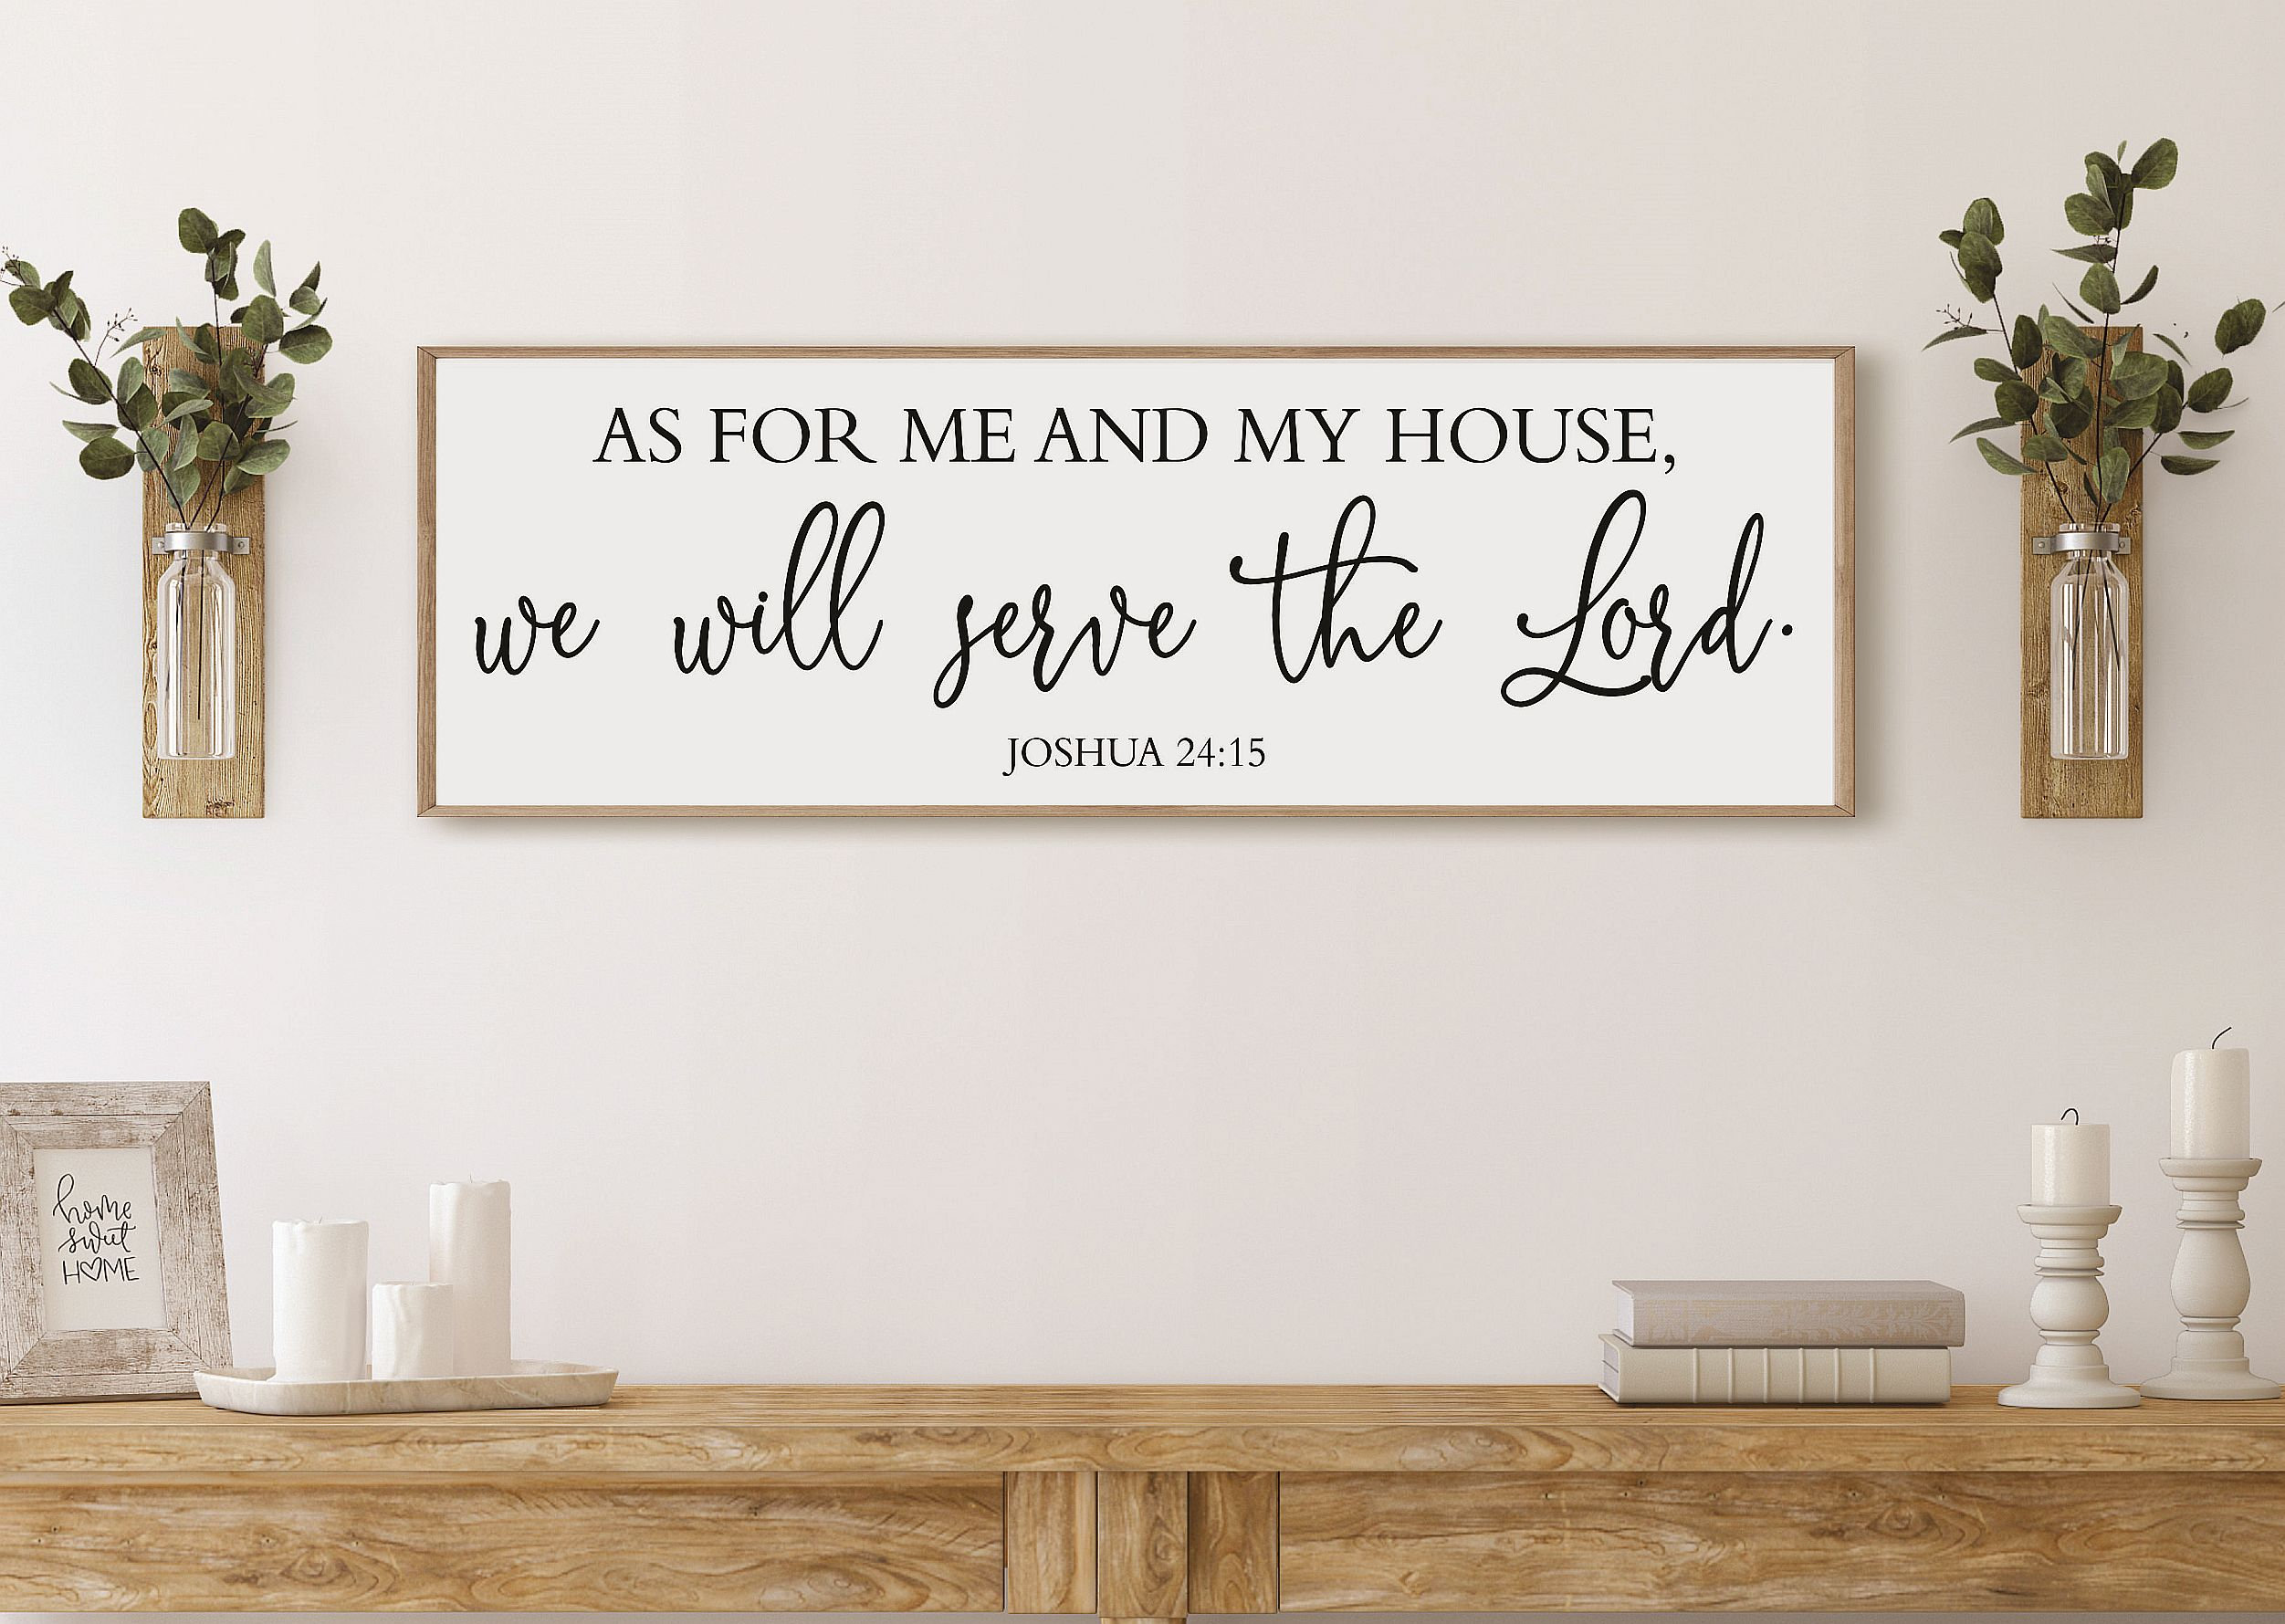 Wood Bible Verse Sign Christian Scripture Home Decor Joshua 24:15 As for Me and My House Rustic Carved Engraved Housewarming Gift